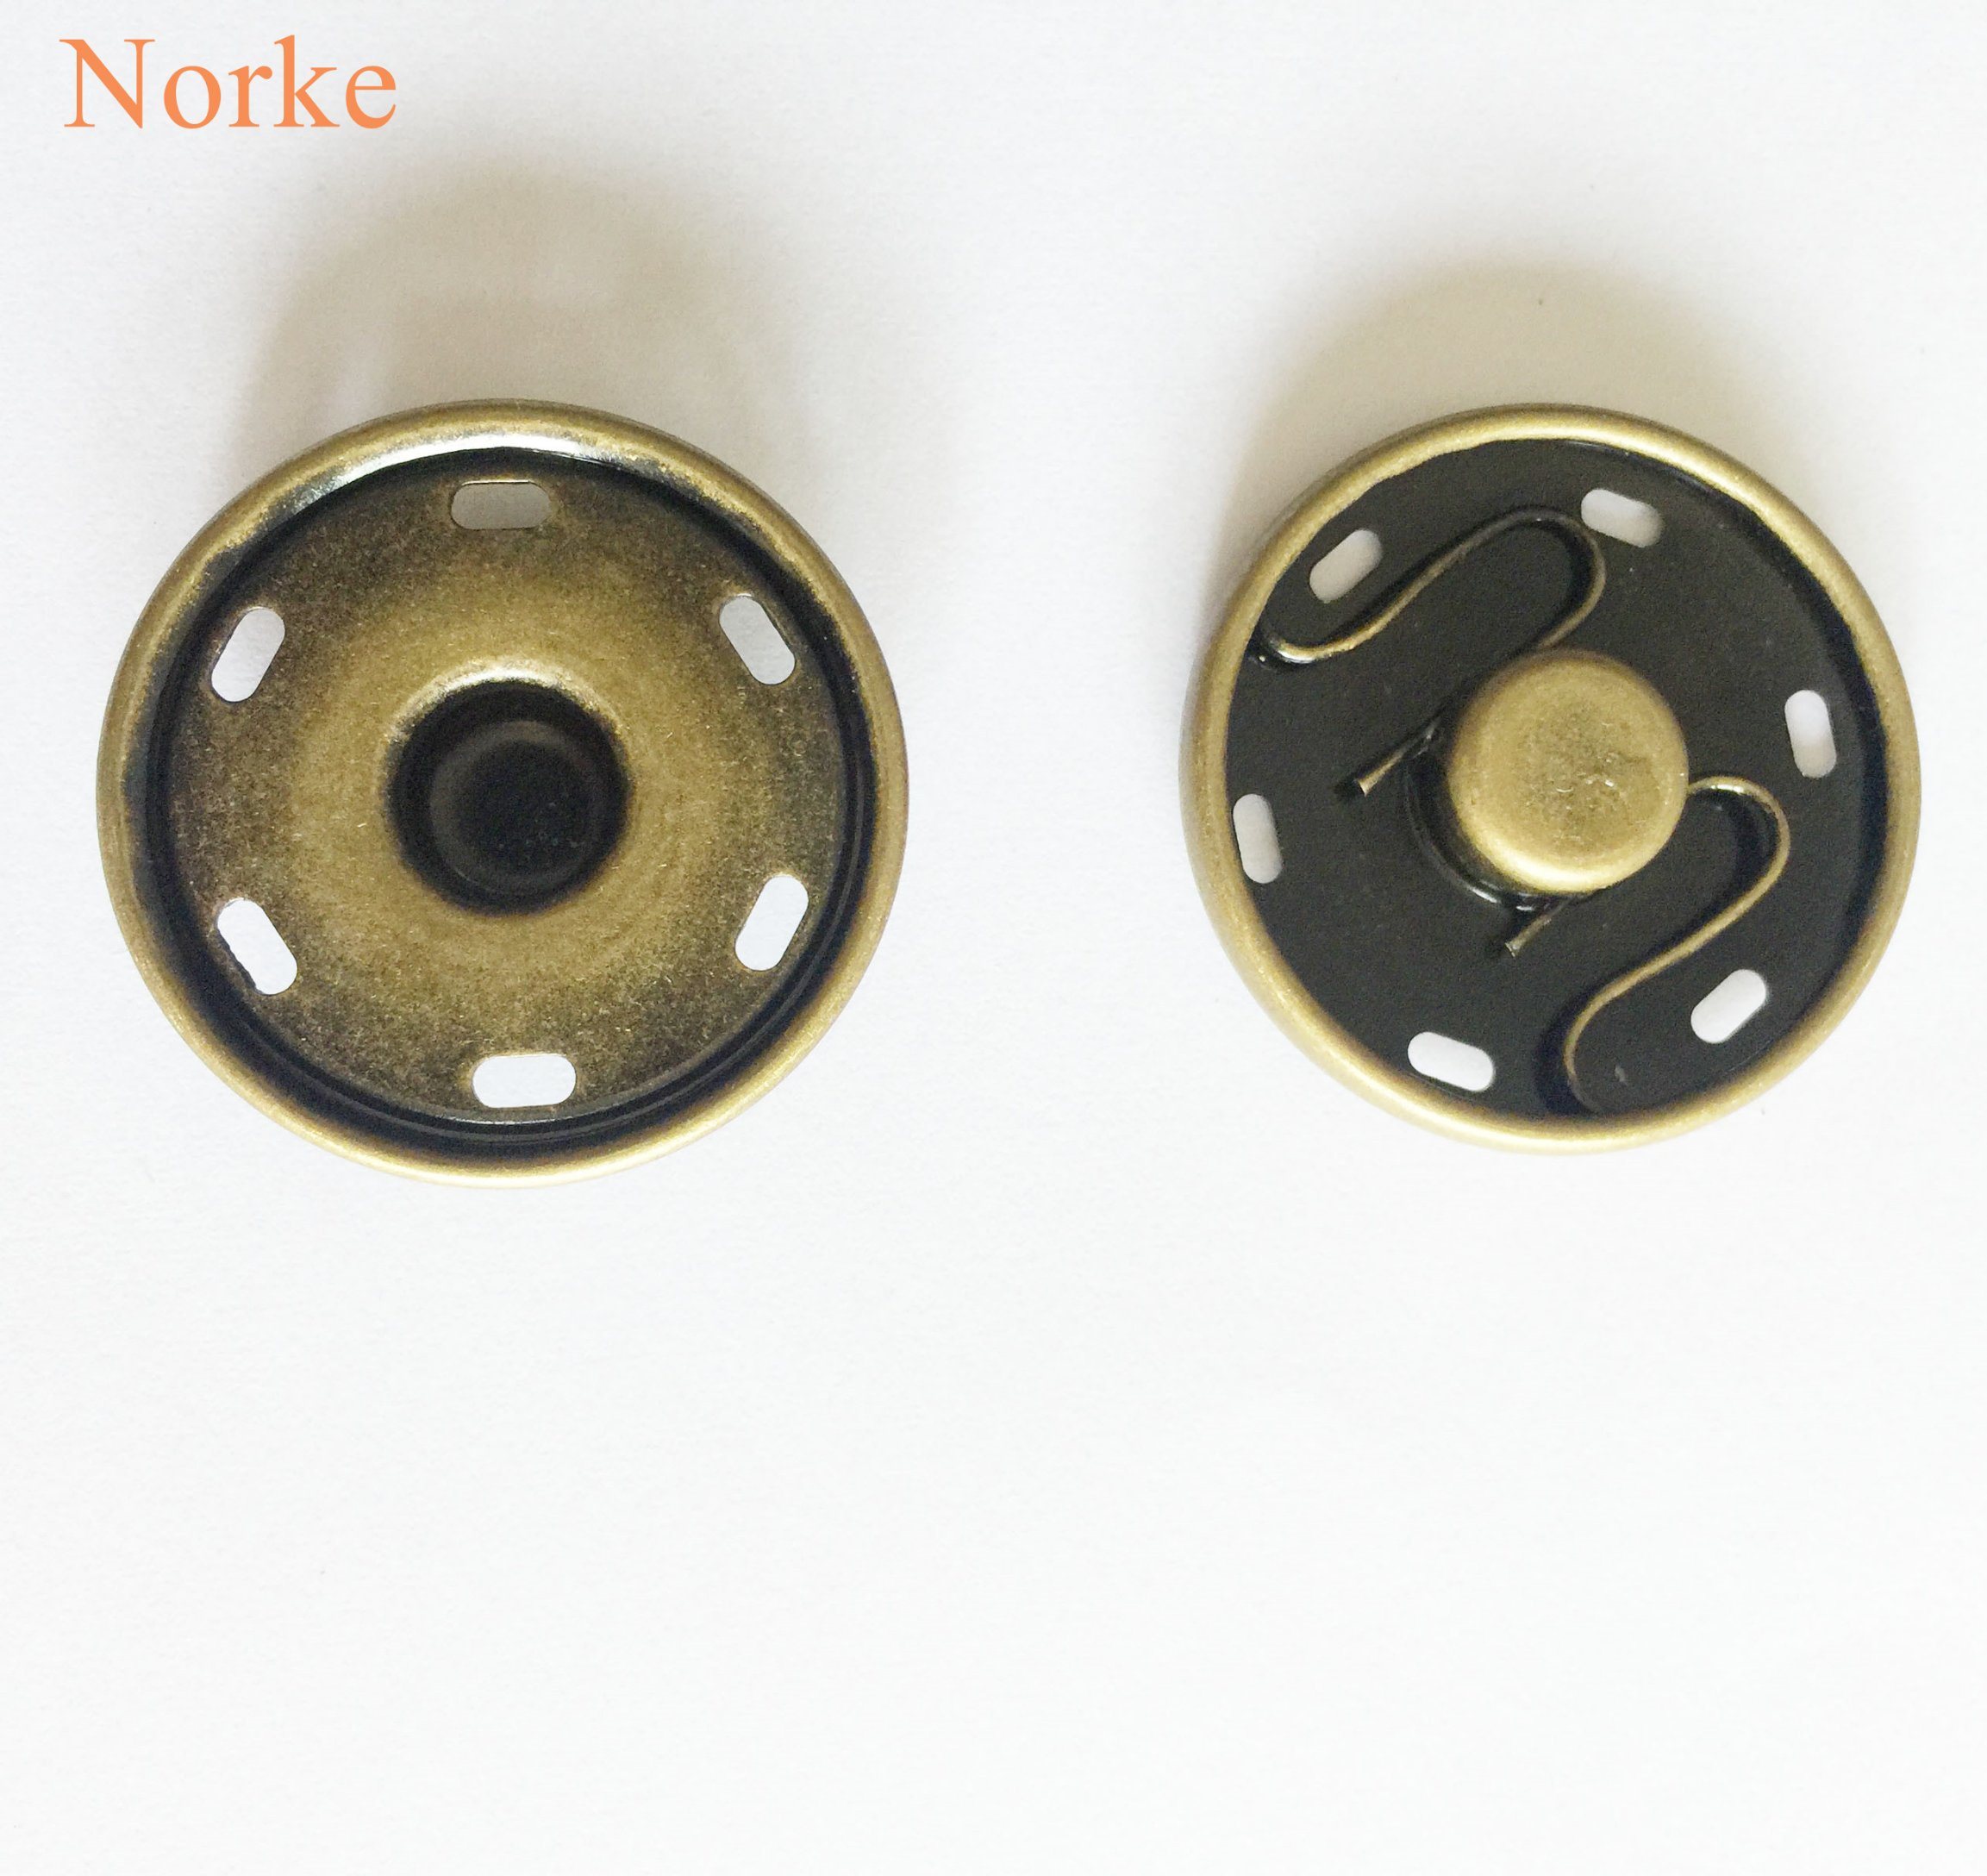 Metal Sew on Snap Fastener Press Studs Buttons